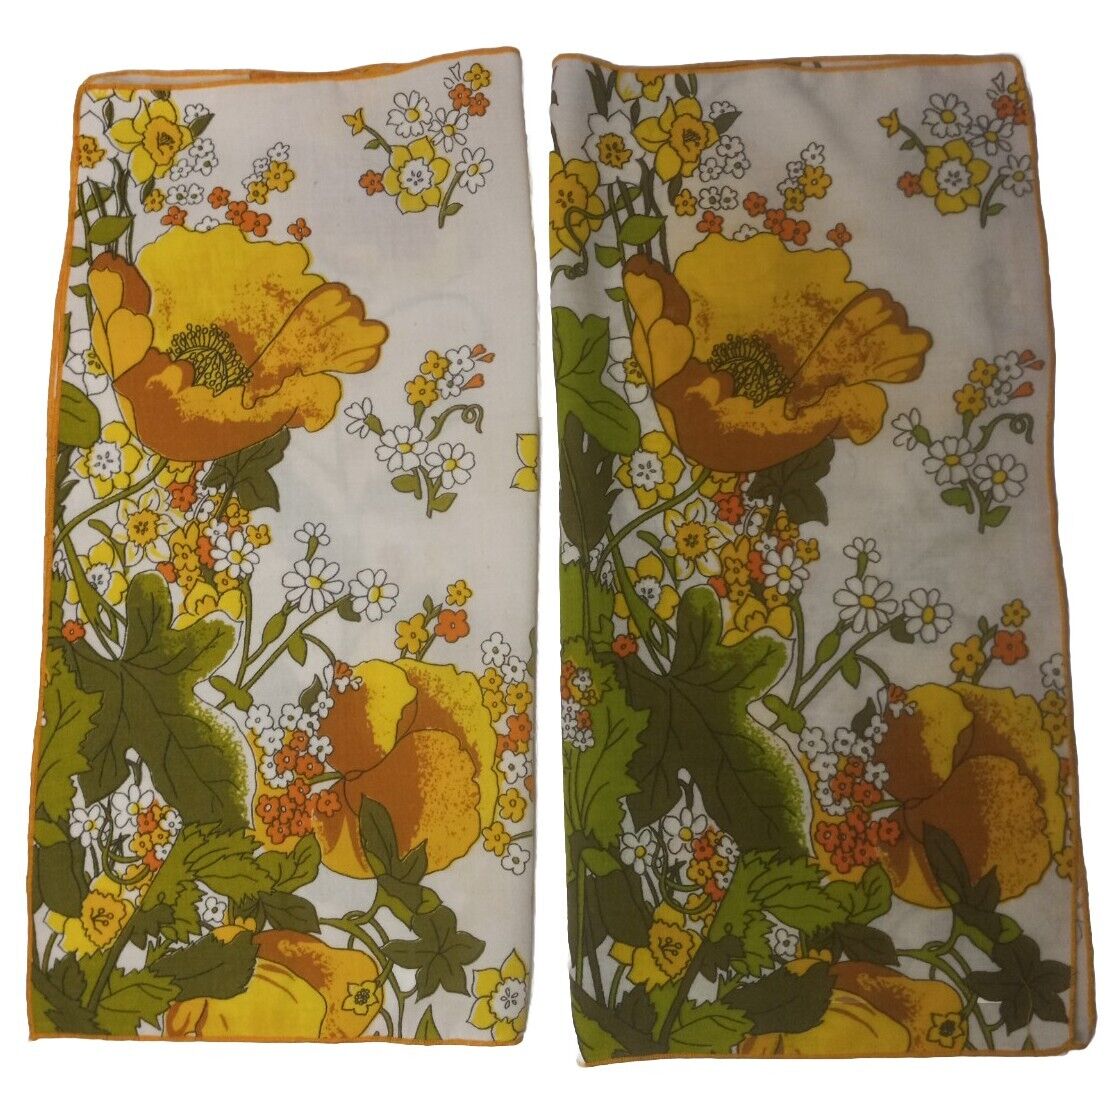 Vintage Mid-Century Mod 1960s Yellow Floral Tablecloth For Side Tables (2)